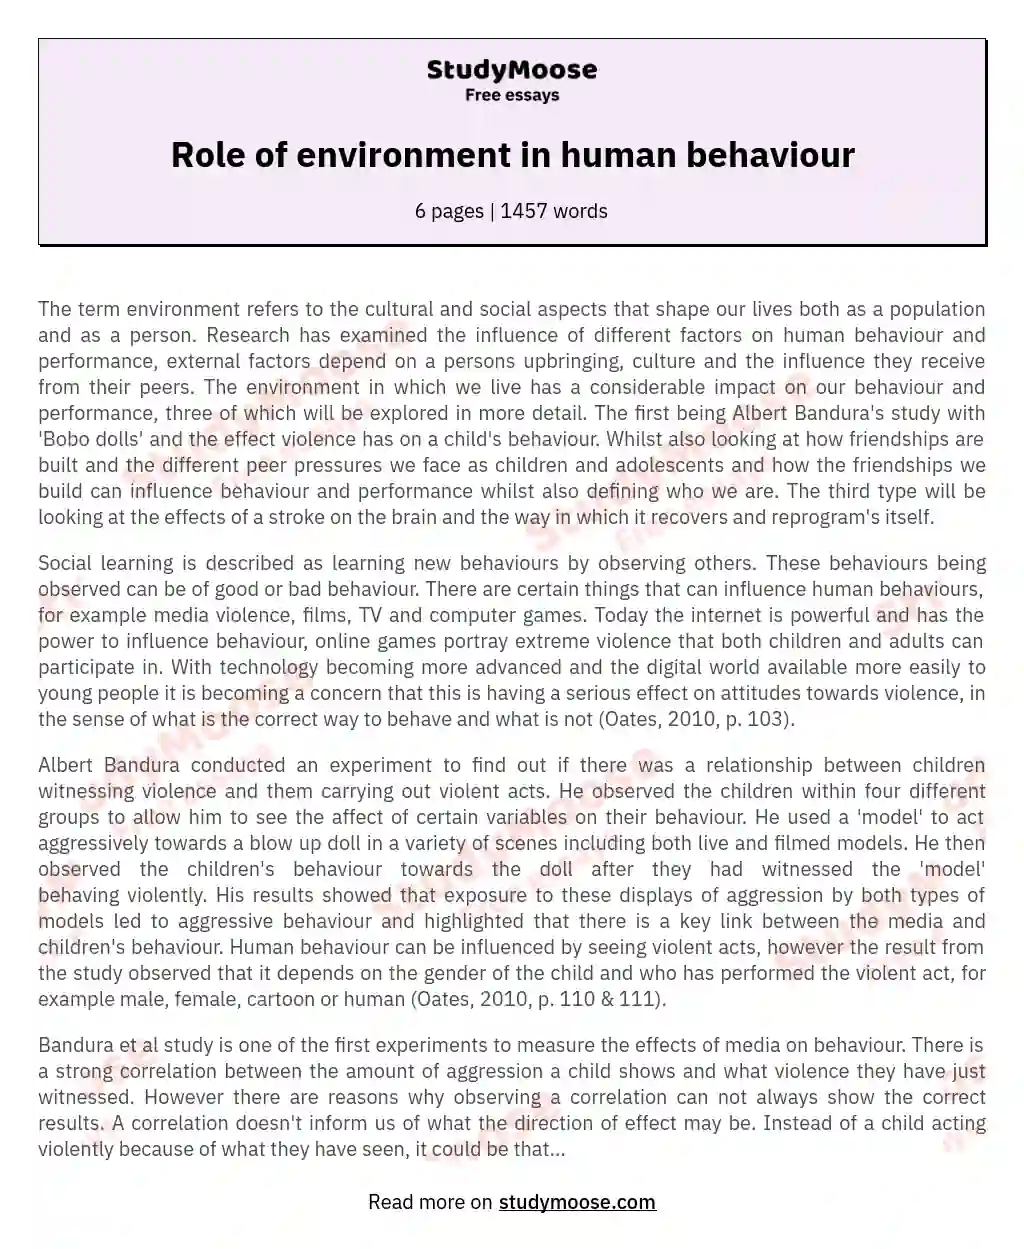 Role of environment in human behaviour essay